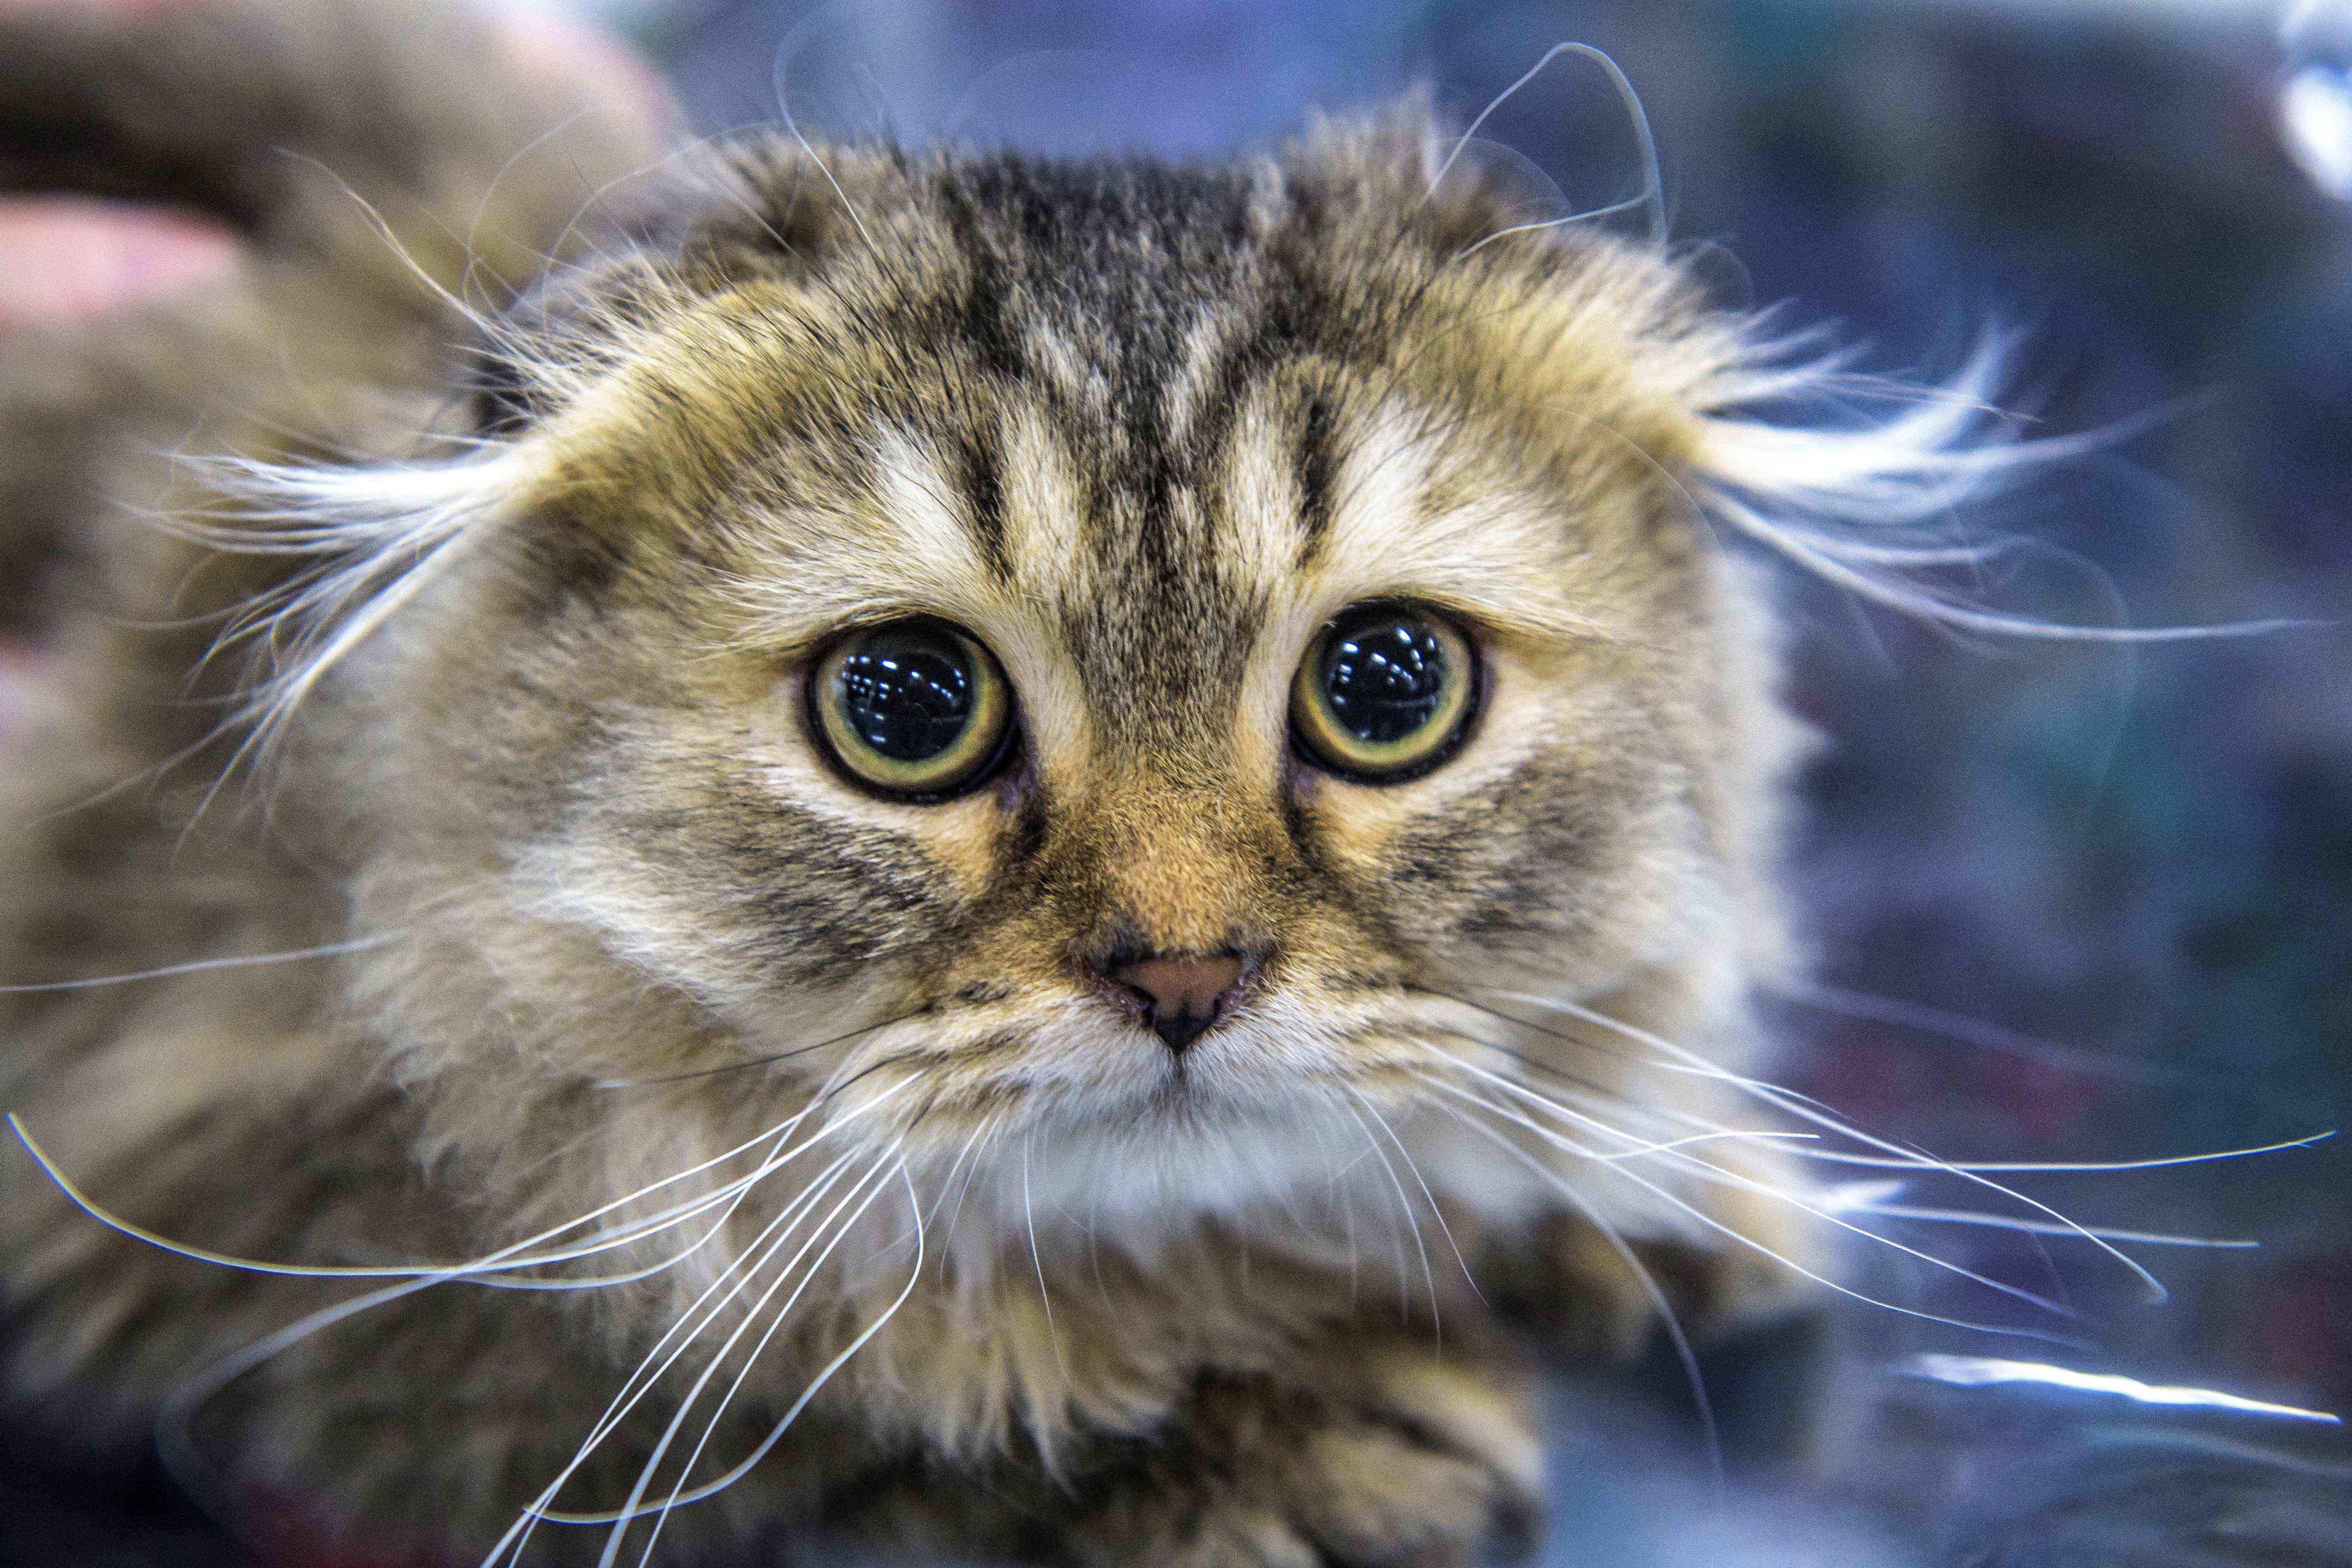 Scottish Fold cats have a genetic disorder that causes them severe and painful lameness, says the RSPCA